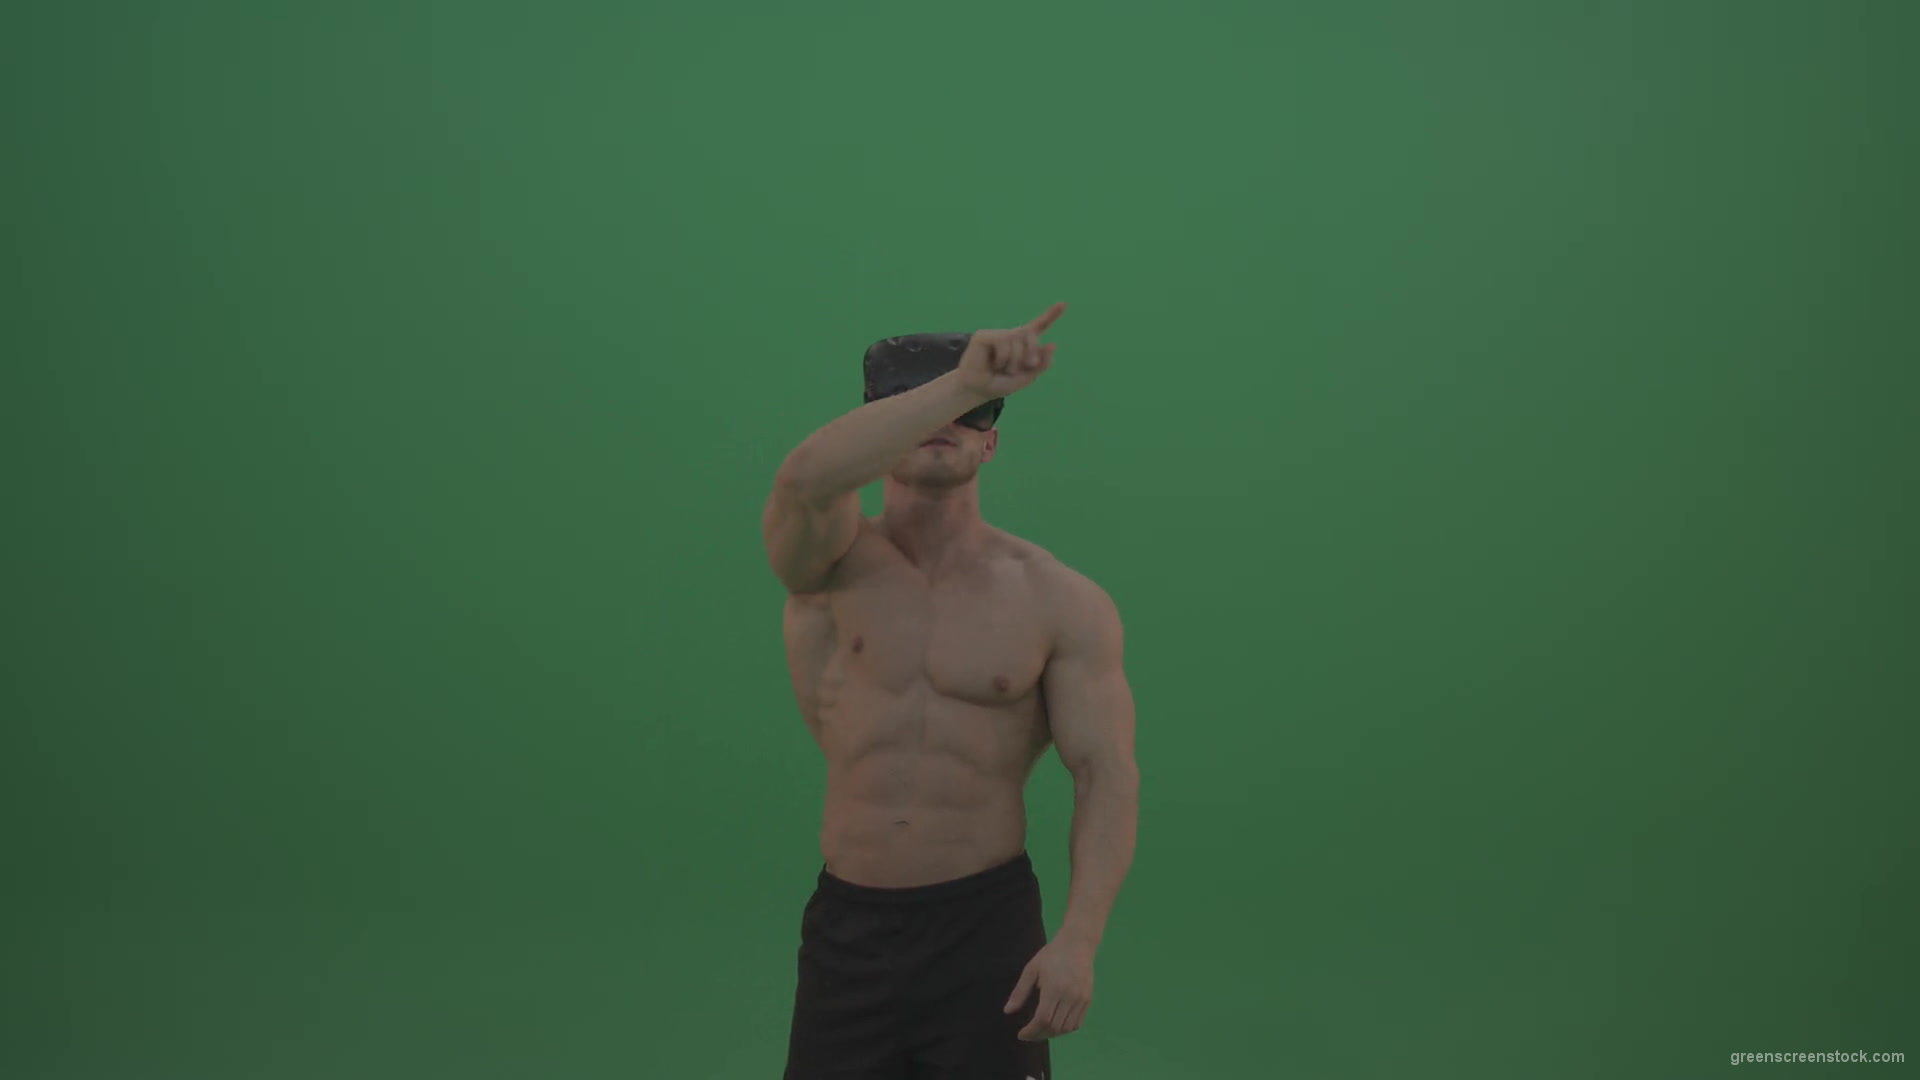 Young_Athletic_Bodybuilder_Working_On_Touch_Pad_Using_Virtual_Reality_Kit_On_Green_Screen_Wall_Background-1920_006 Green Screen Stock